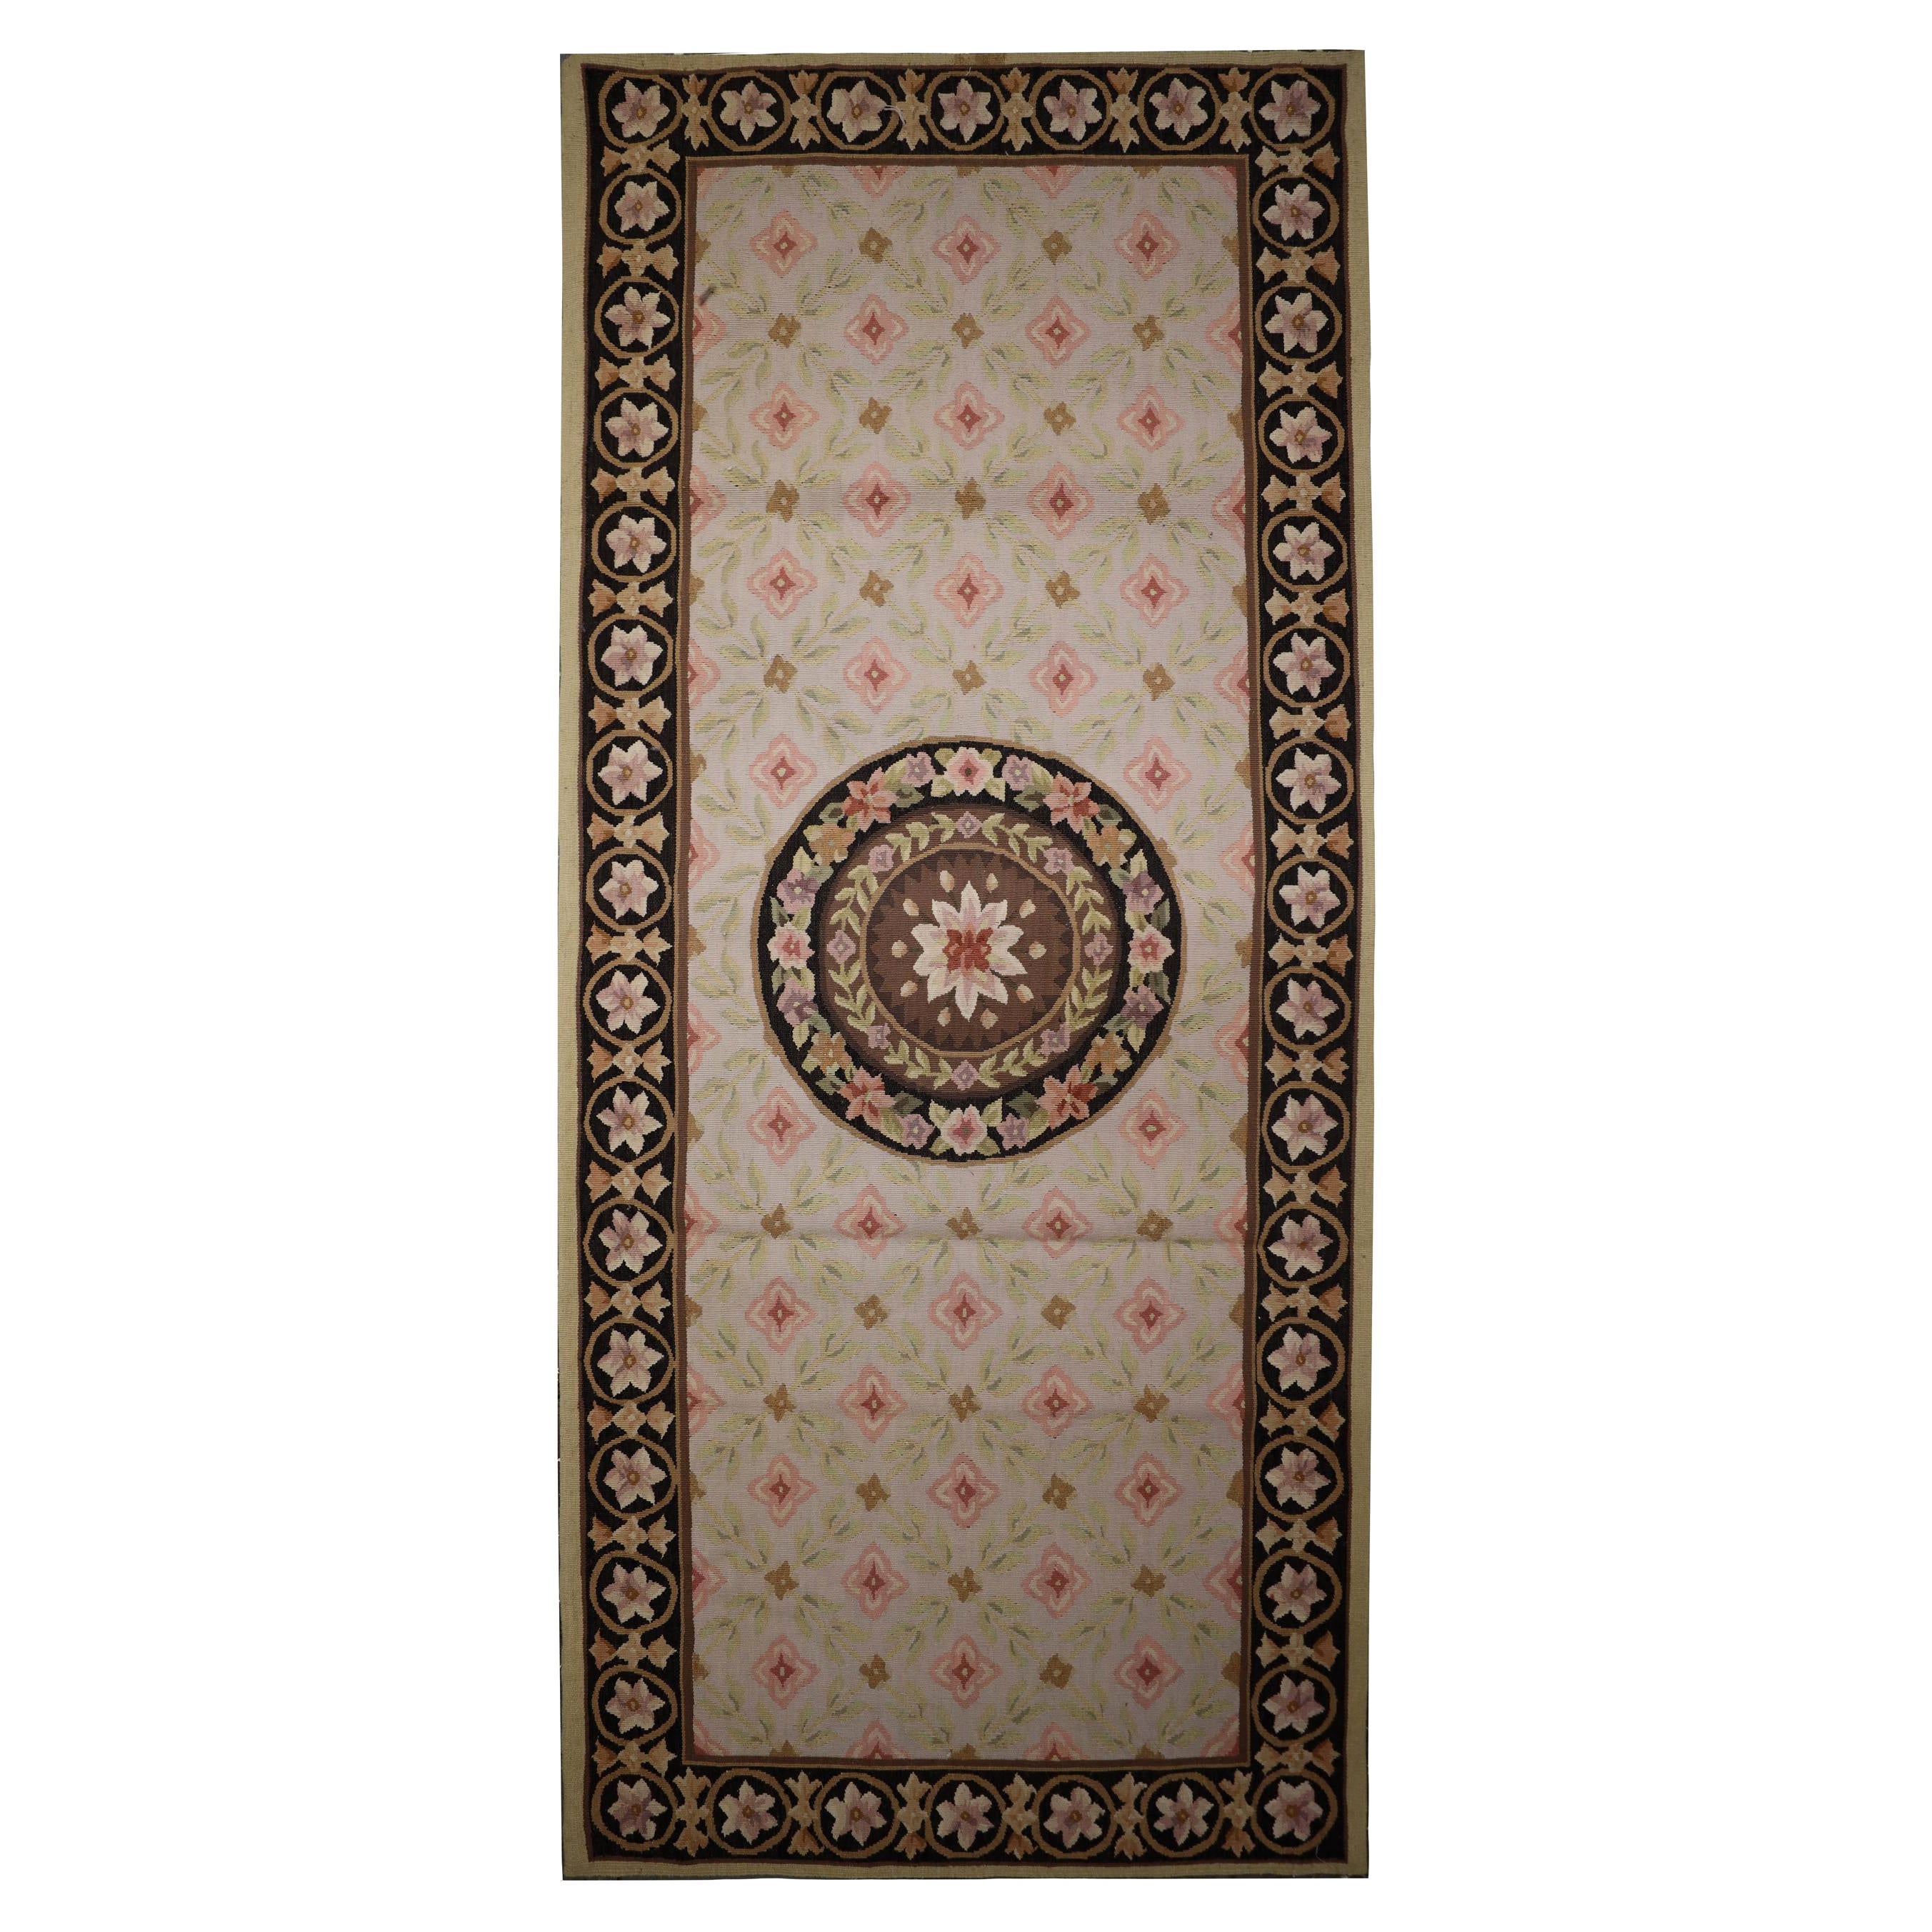 Beige Needlepoint Runner Rug Handwoven Traditional Floral Area Rug